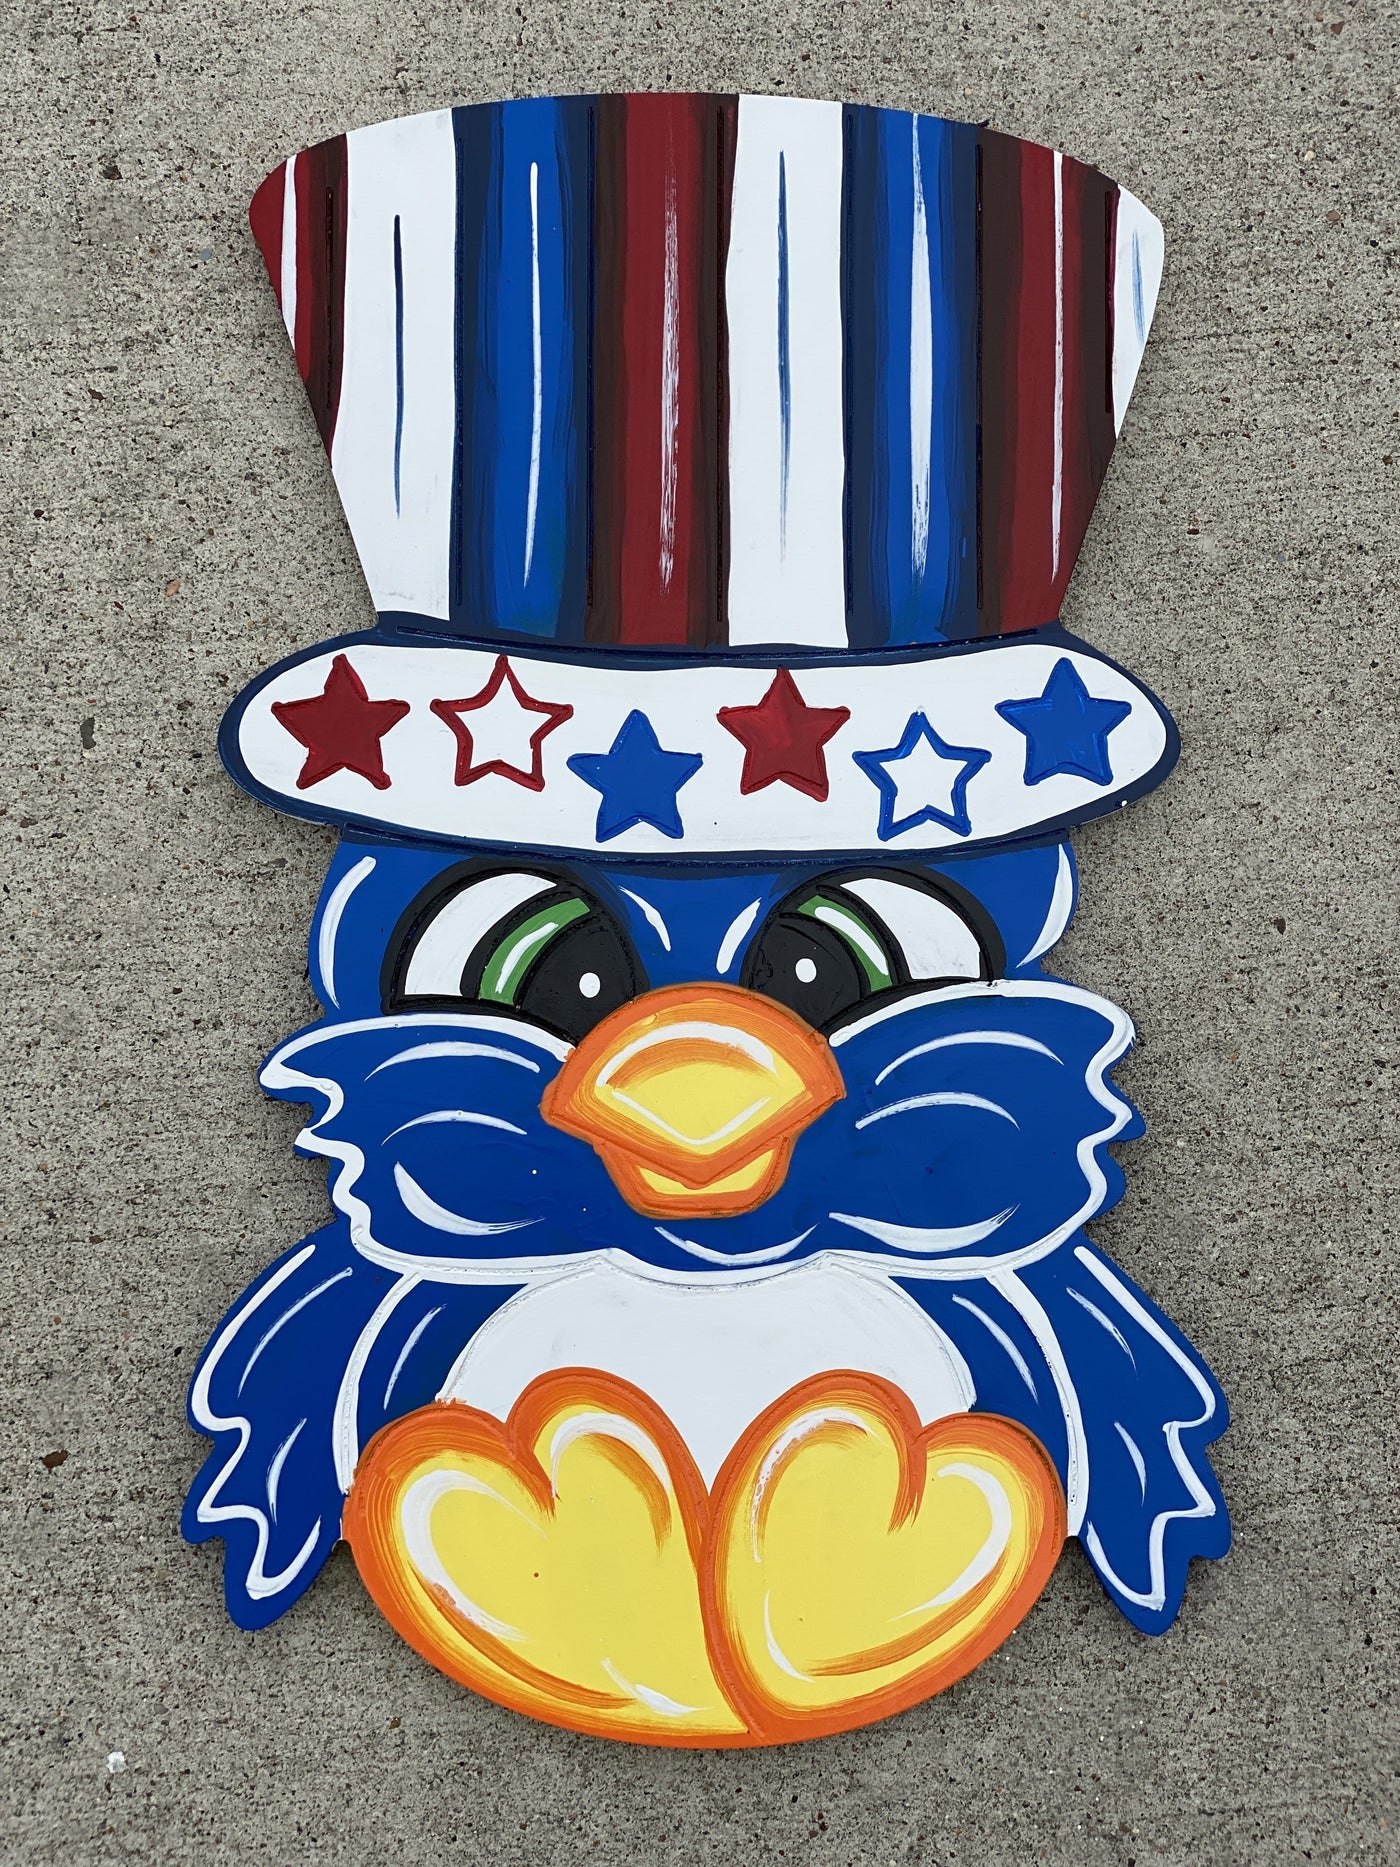 Patriotic Yard Art  Owl ready to be painted